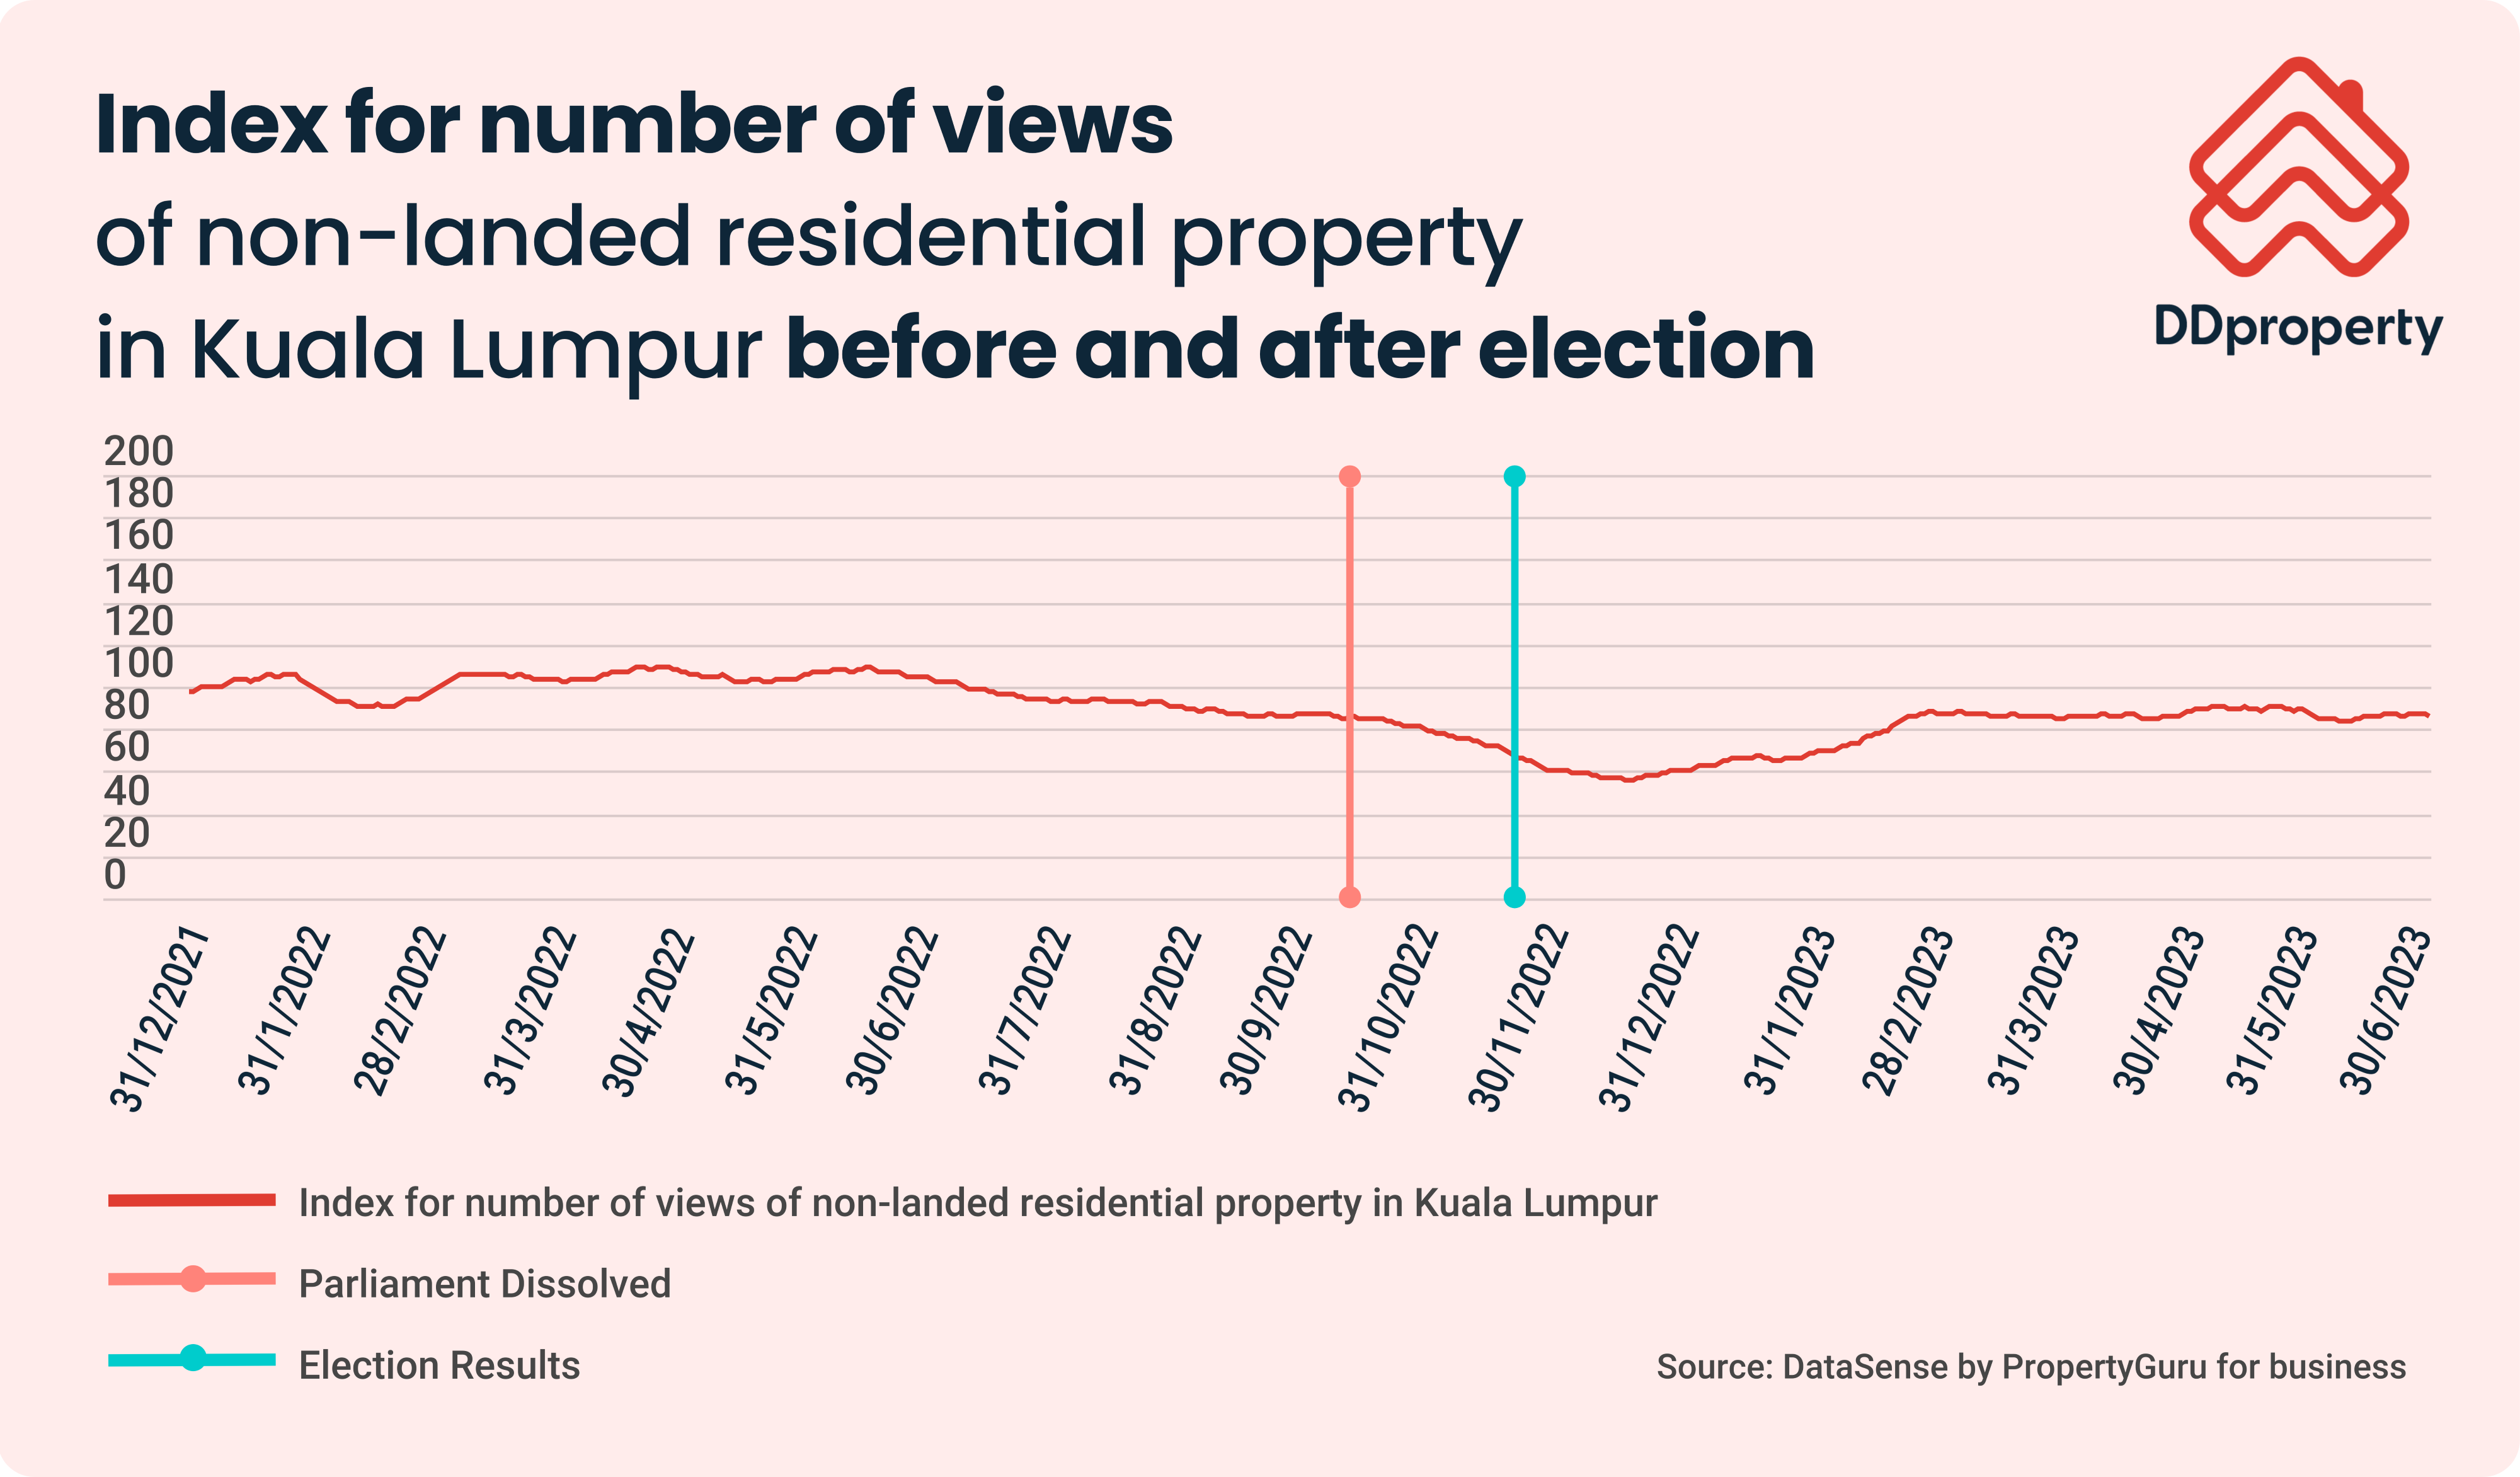 Index for number of views of non-landed residential property in Kuala Lumpur before and after election